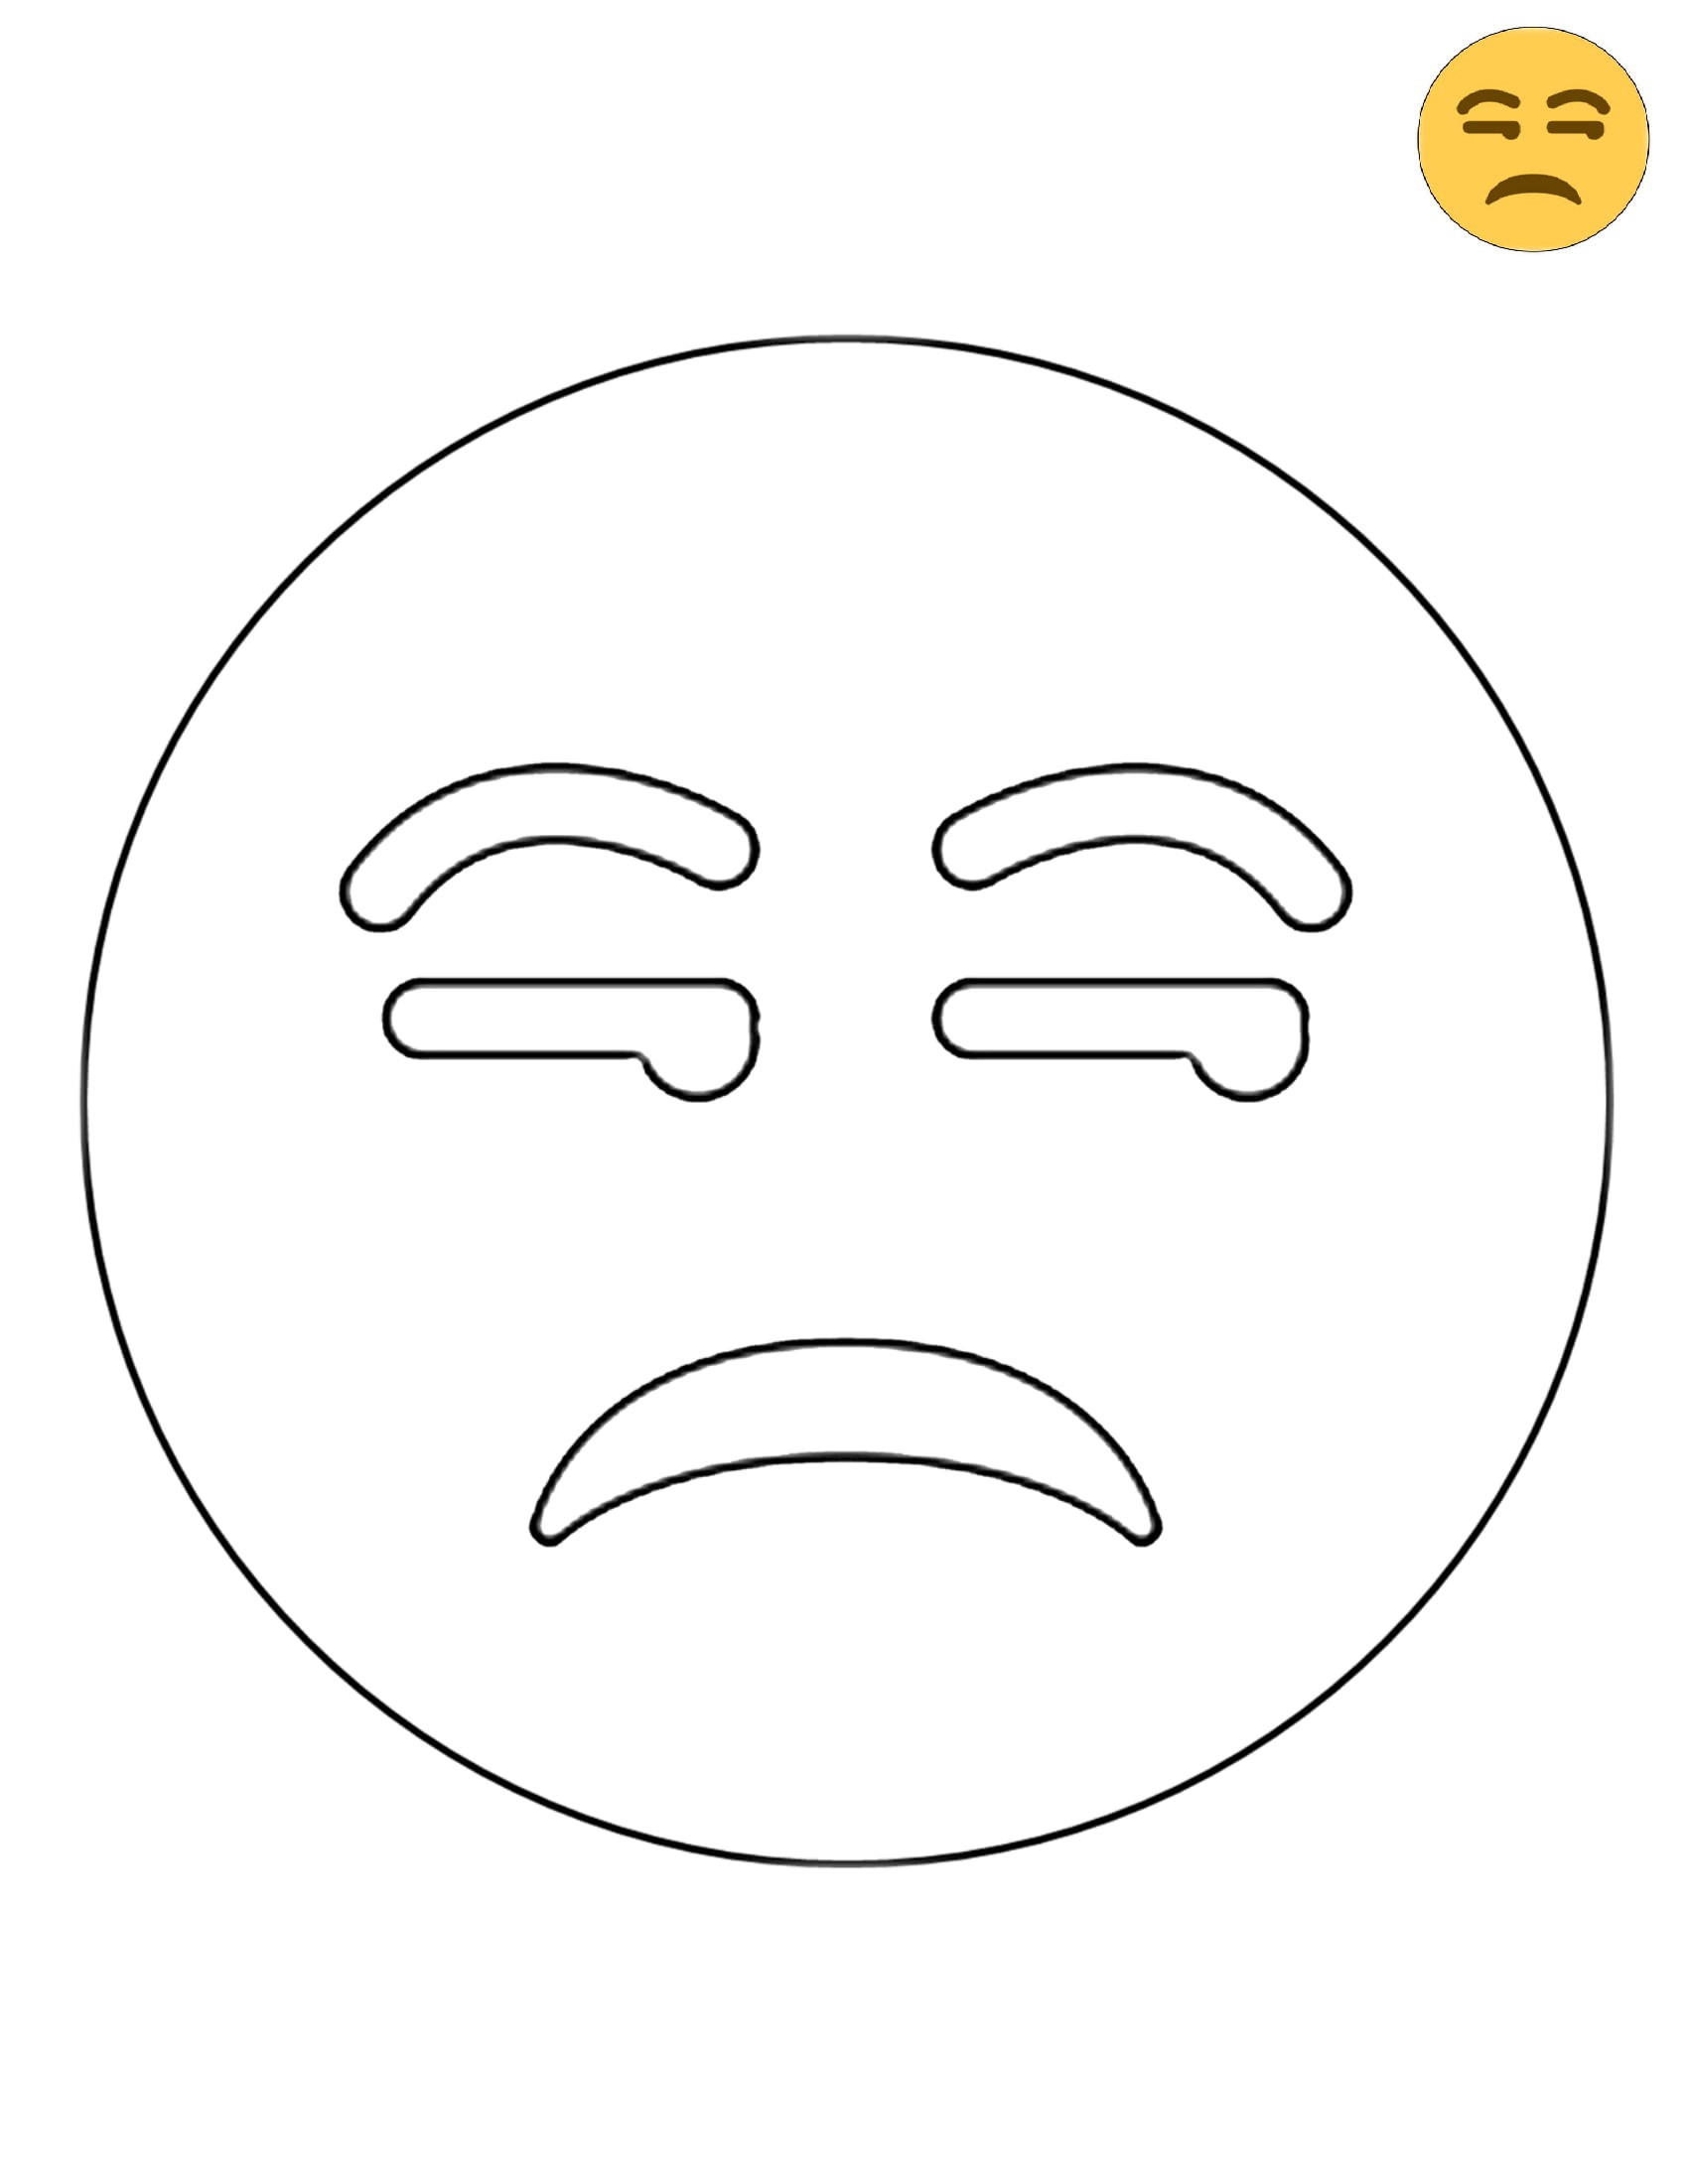 Twitter Unamused Face Emoji Coloring Page